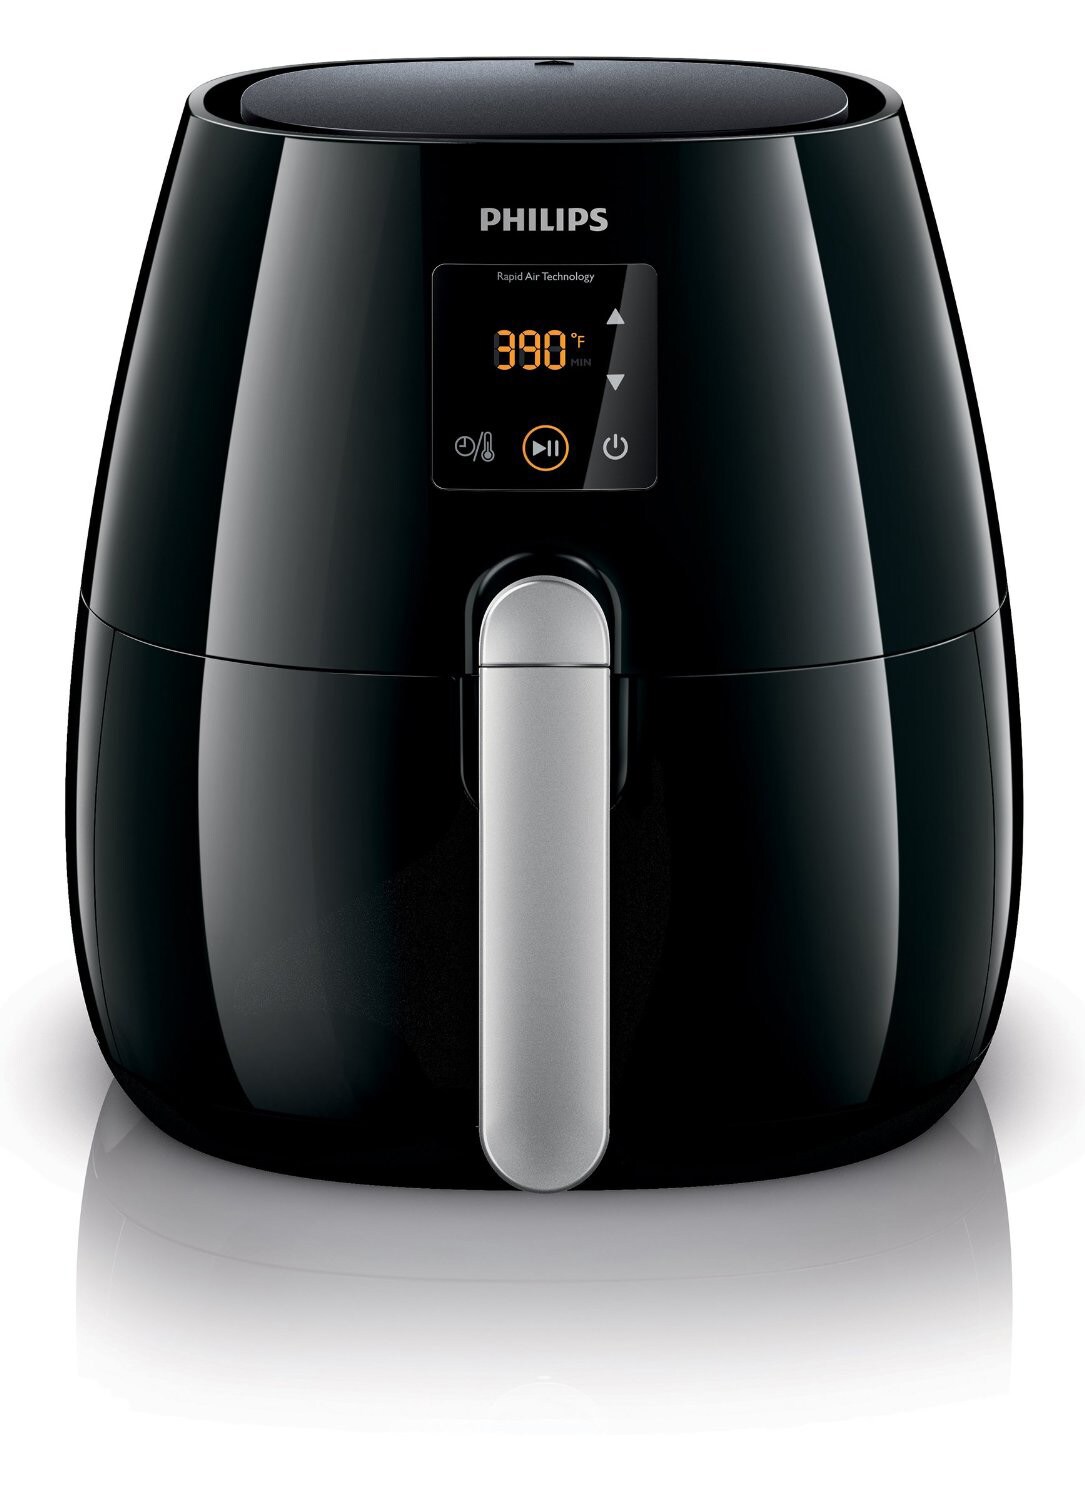 Glimp Bedenk Prominent Philips Viva Collection Digital Air Fryer at Lowes.com